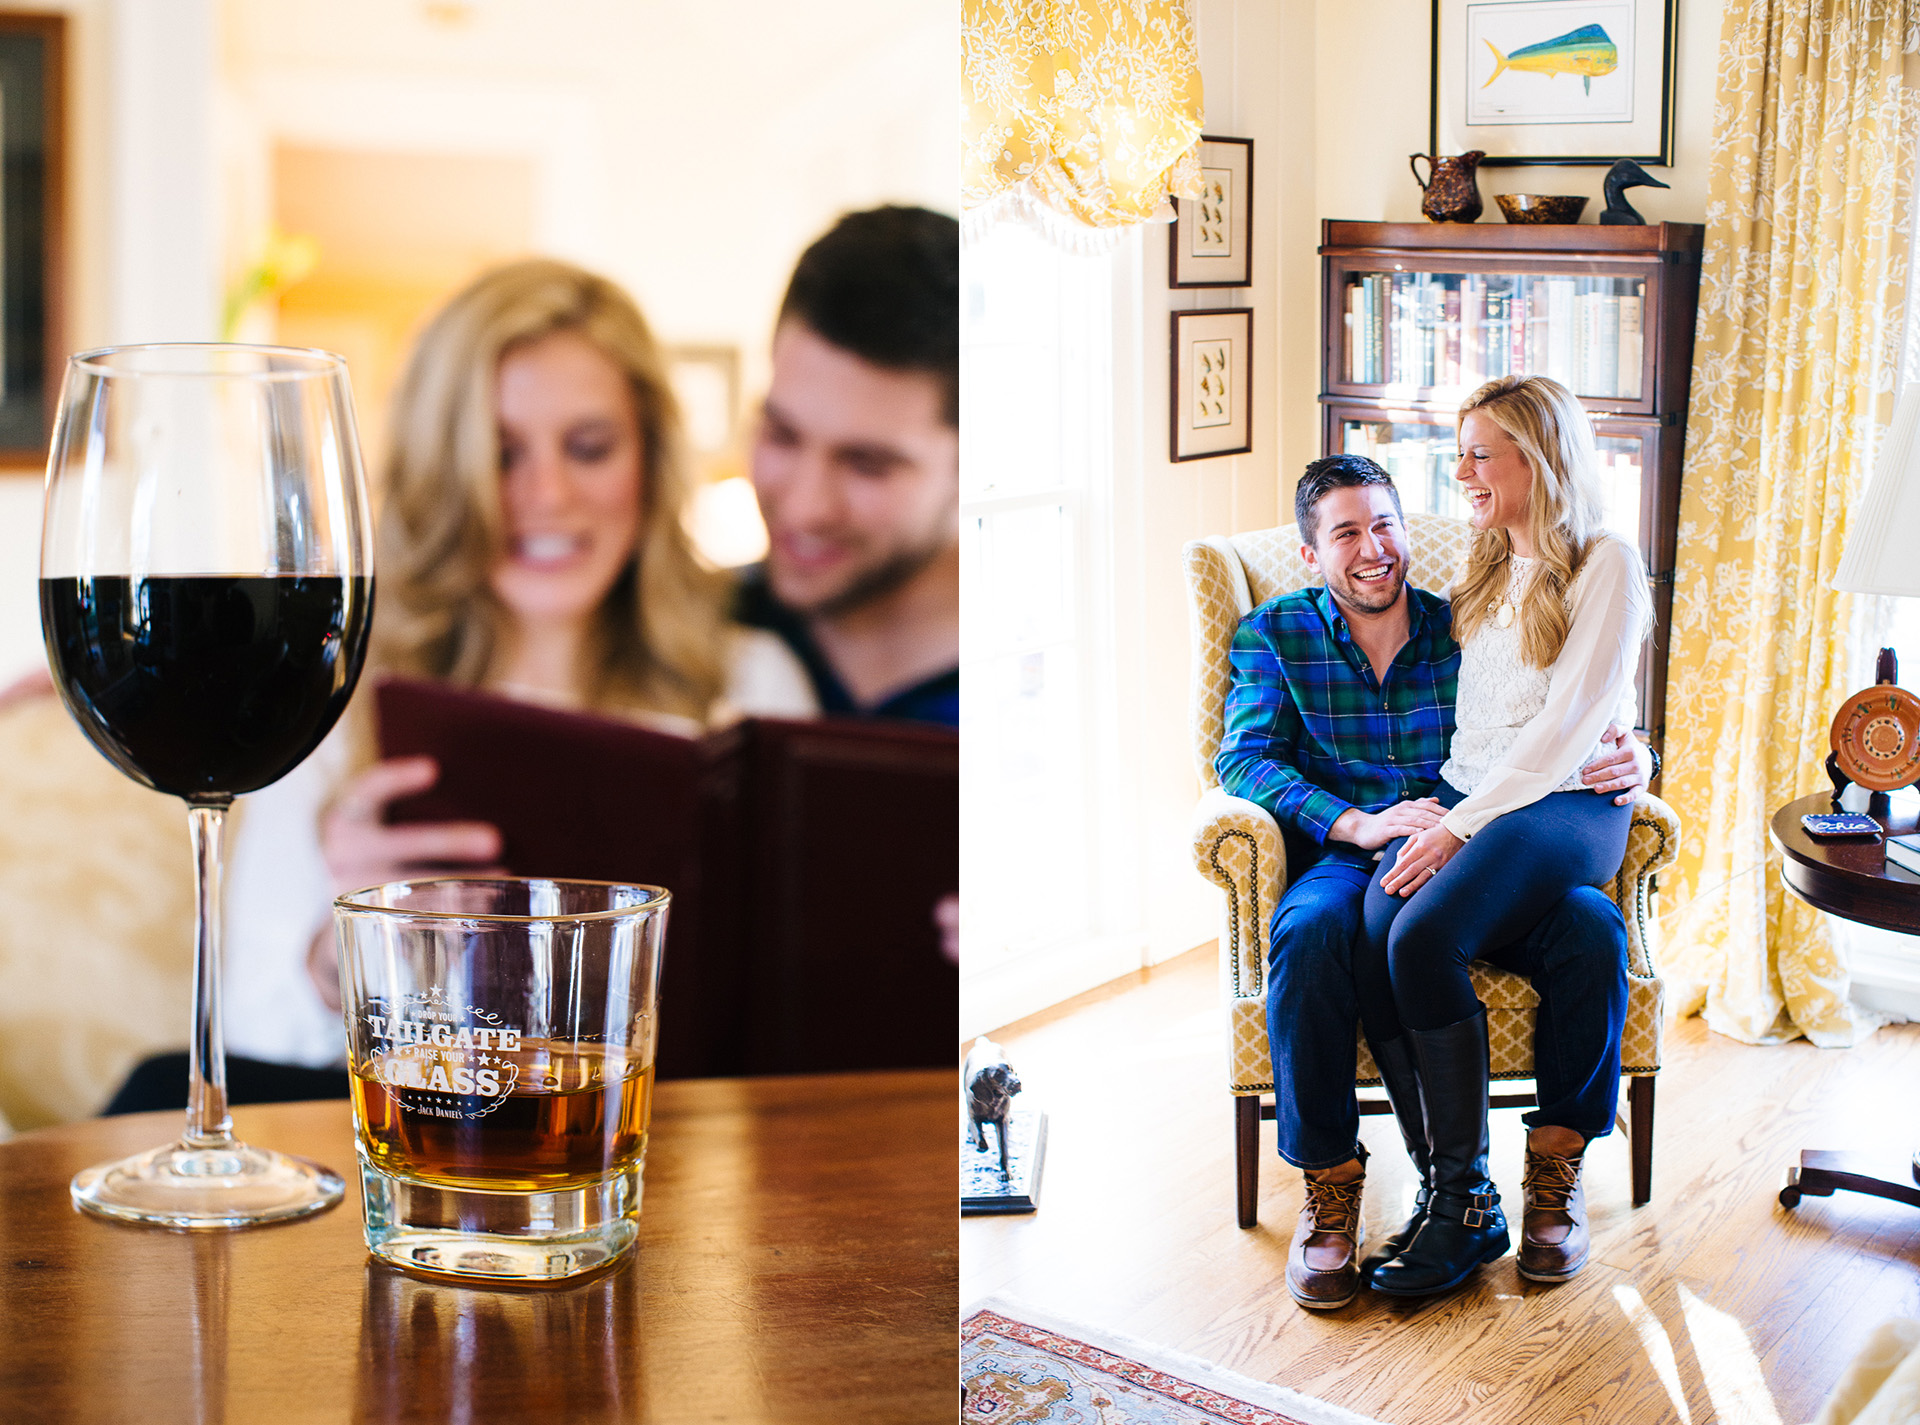 Winter Engagement Session in Bay Village - Too Much Awesomeness - Cleveland Wedding Photographer 05.jpg